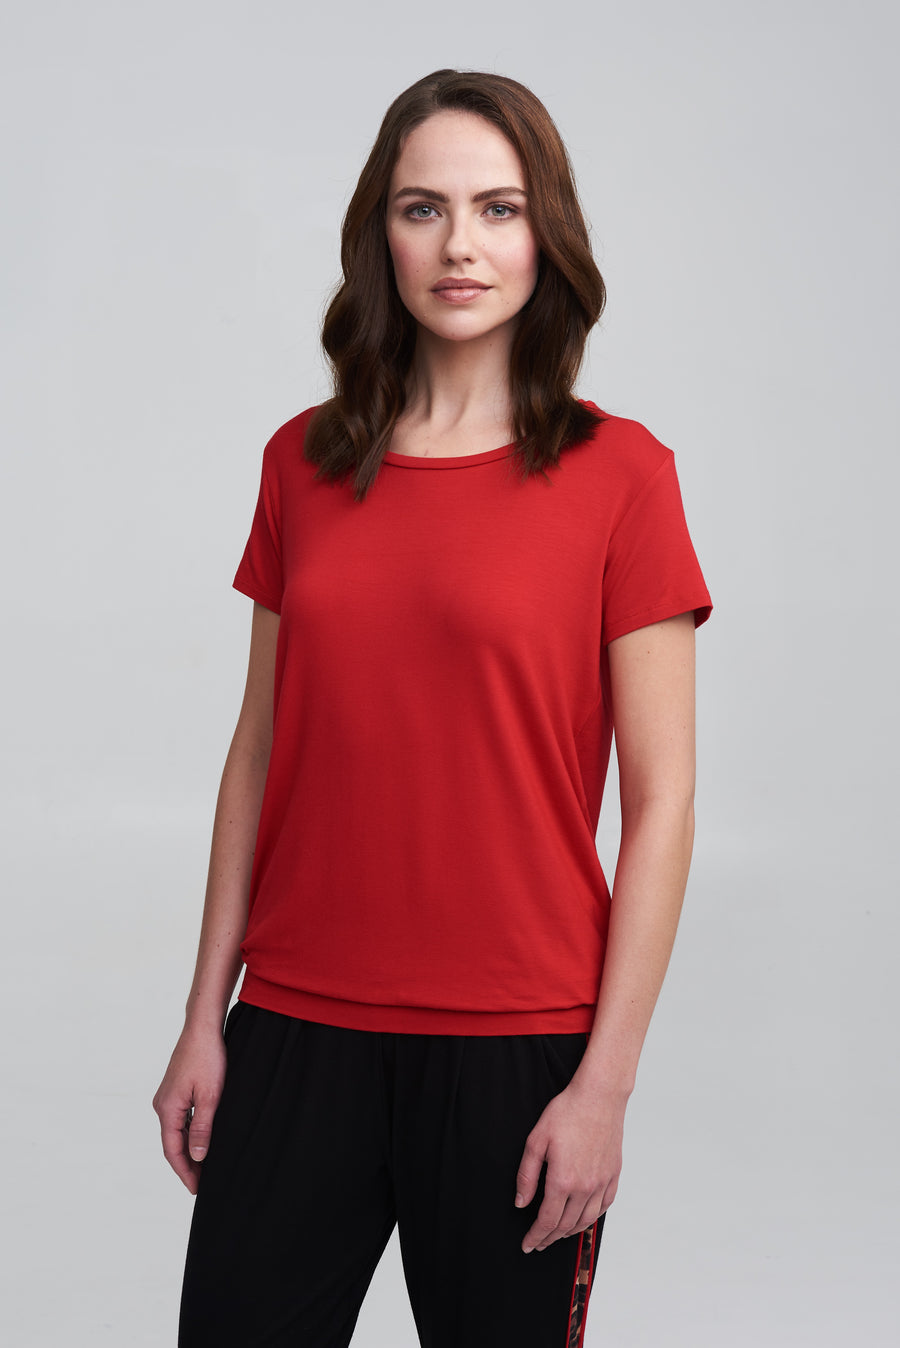 Smooth You Tee - Scarlet